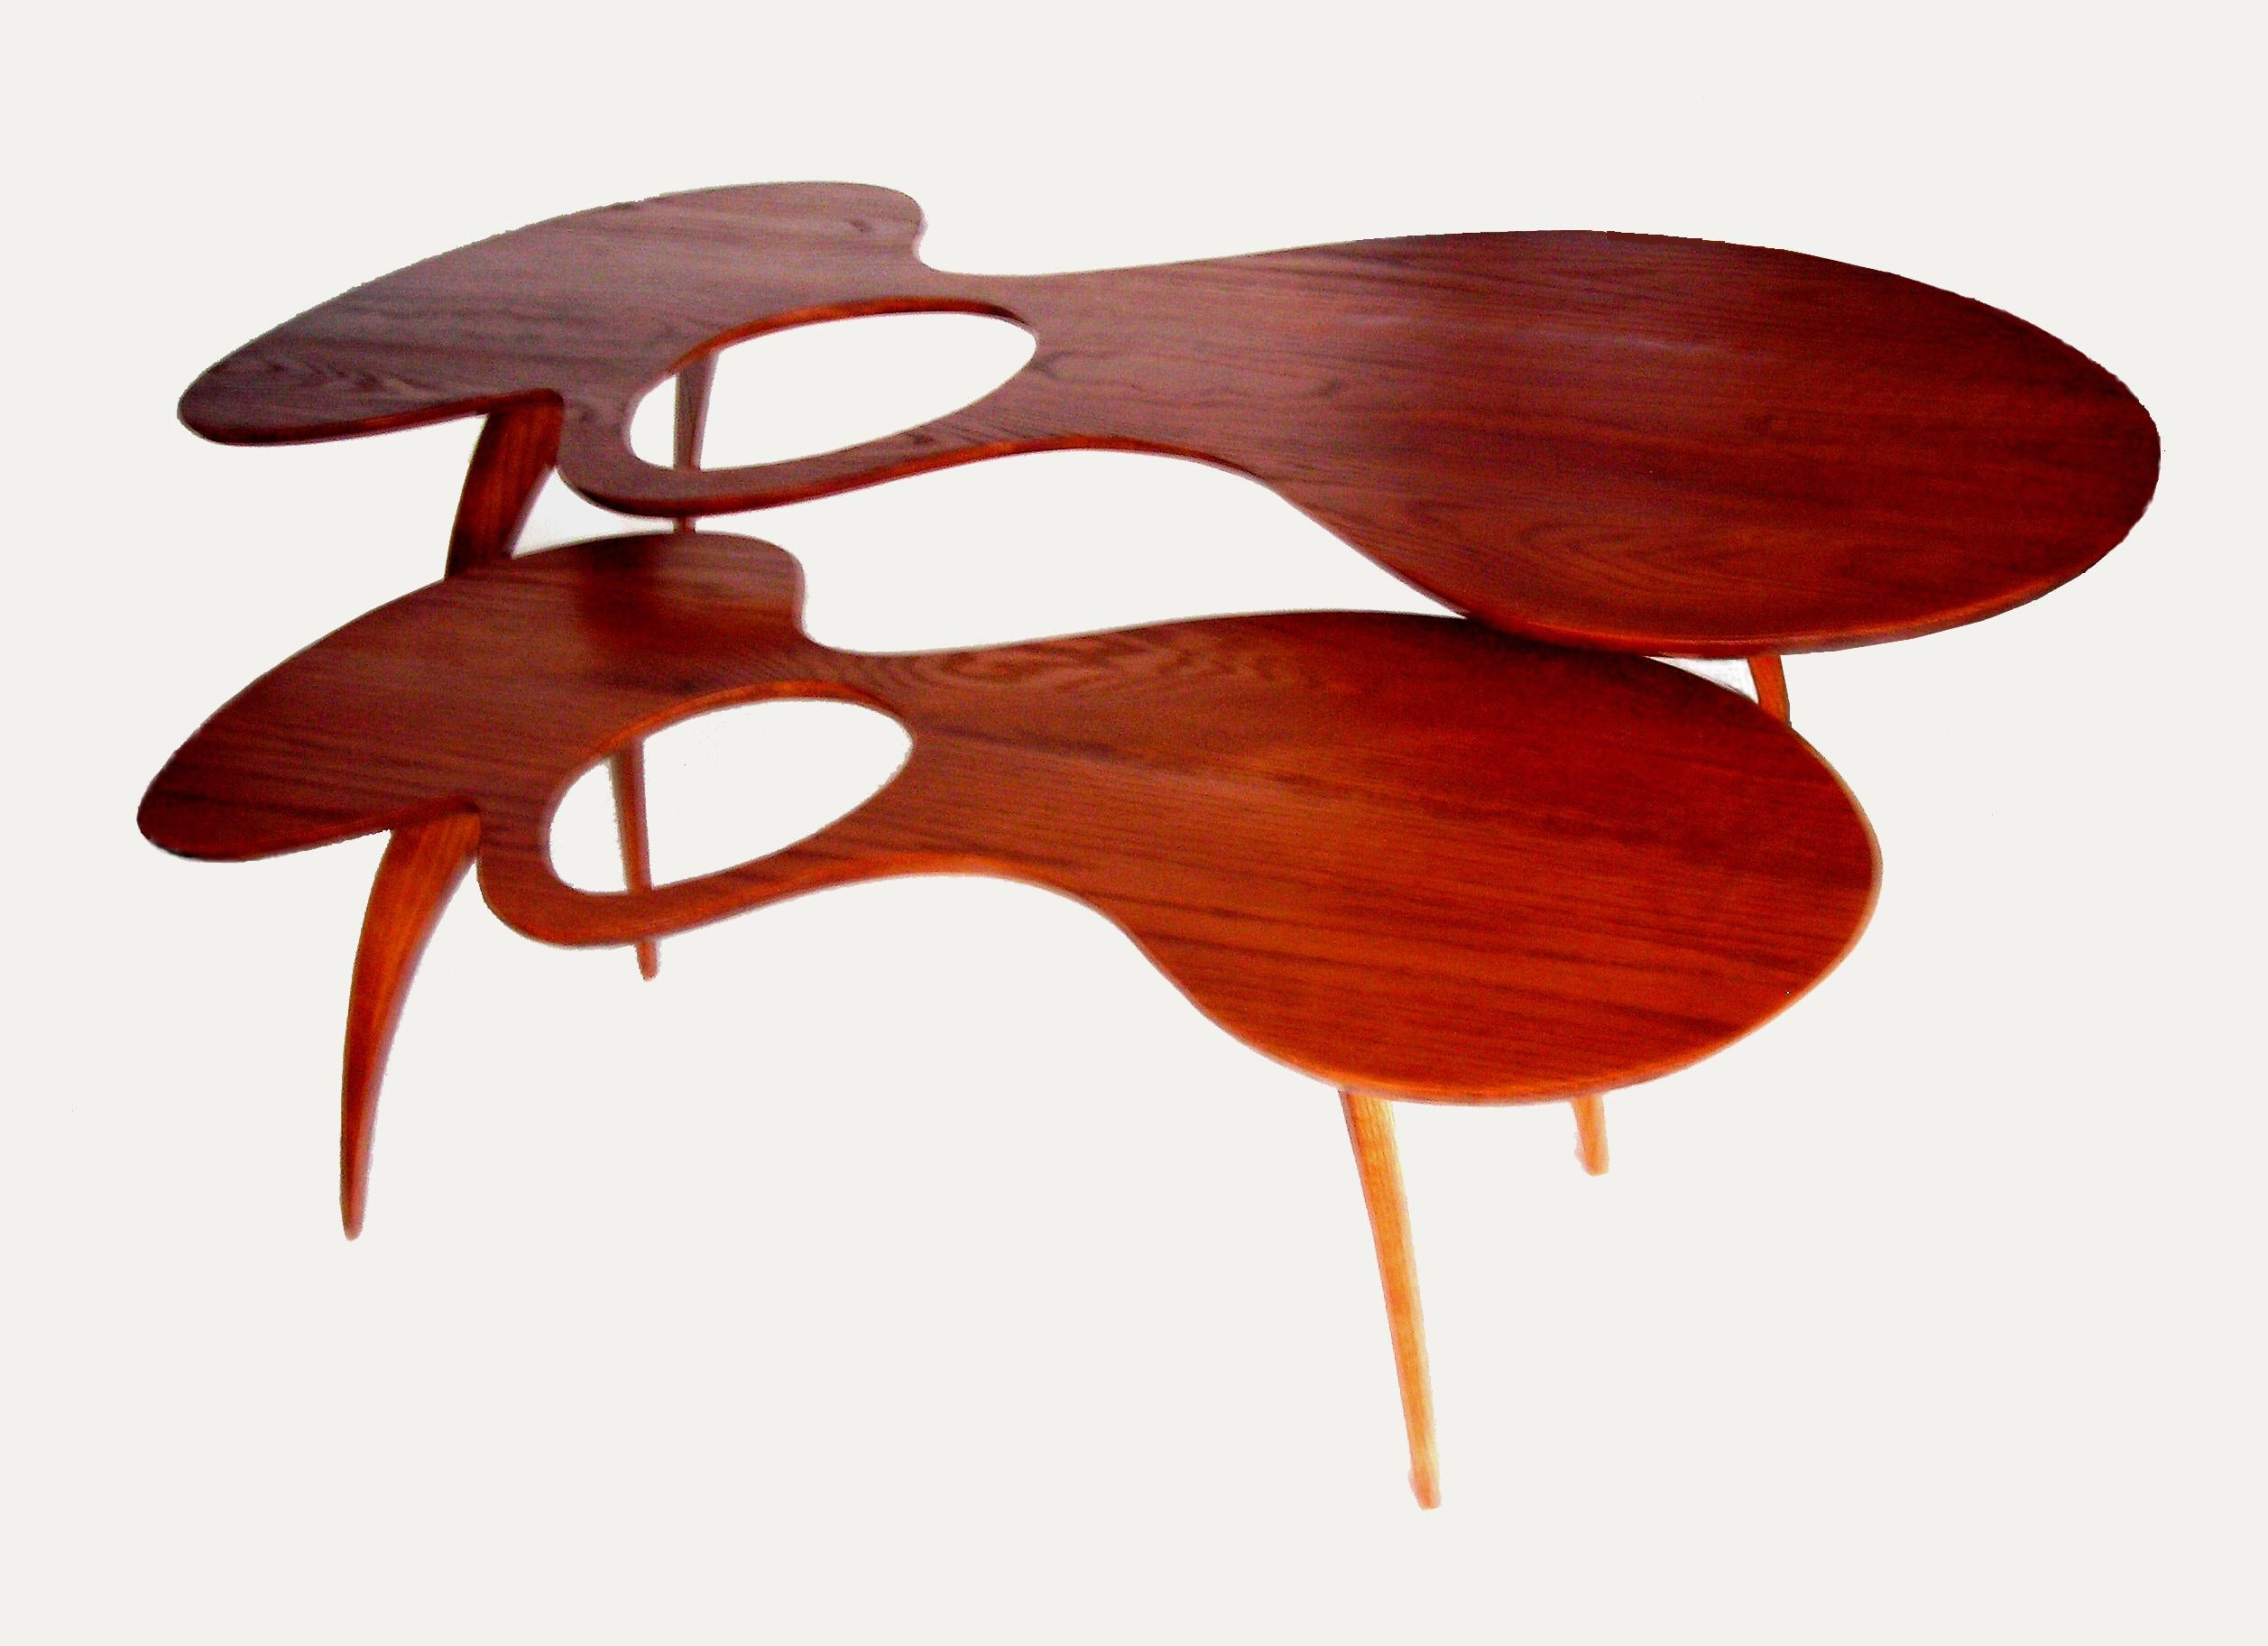 Alejandro Dron Abstract Sculpture - "Cytoplasm" Hand Made Sculptural Table 